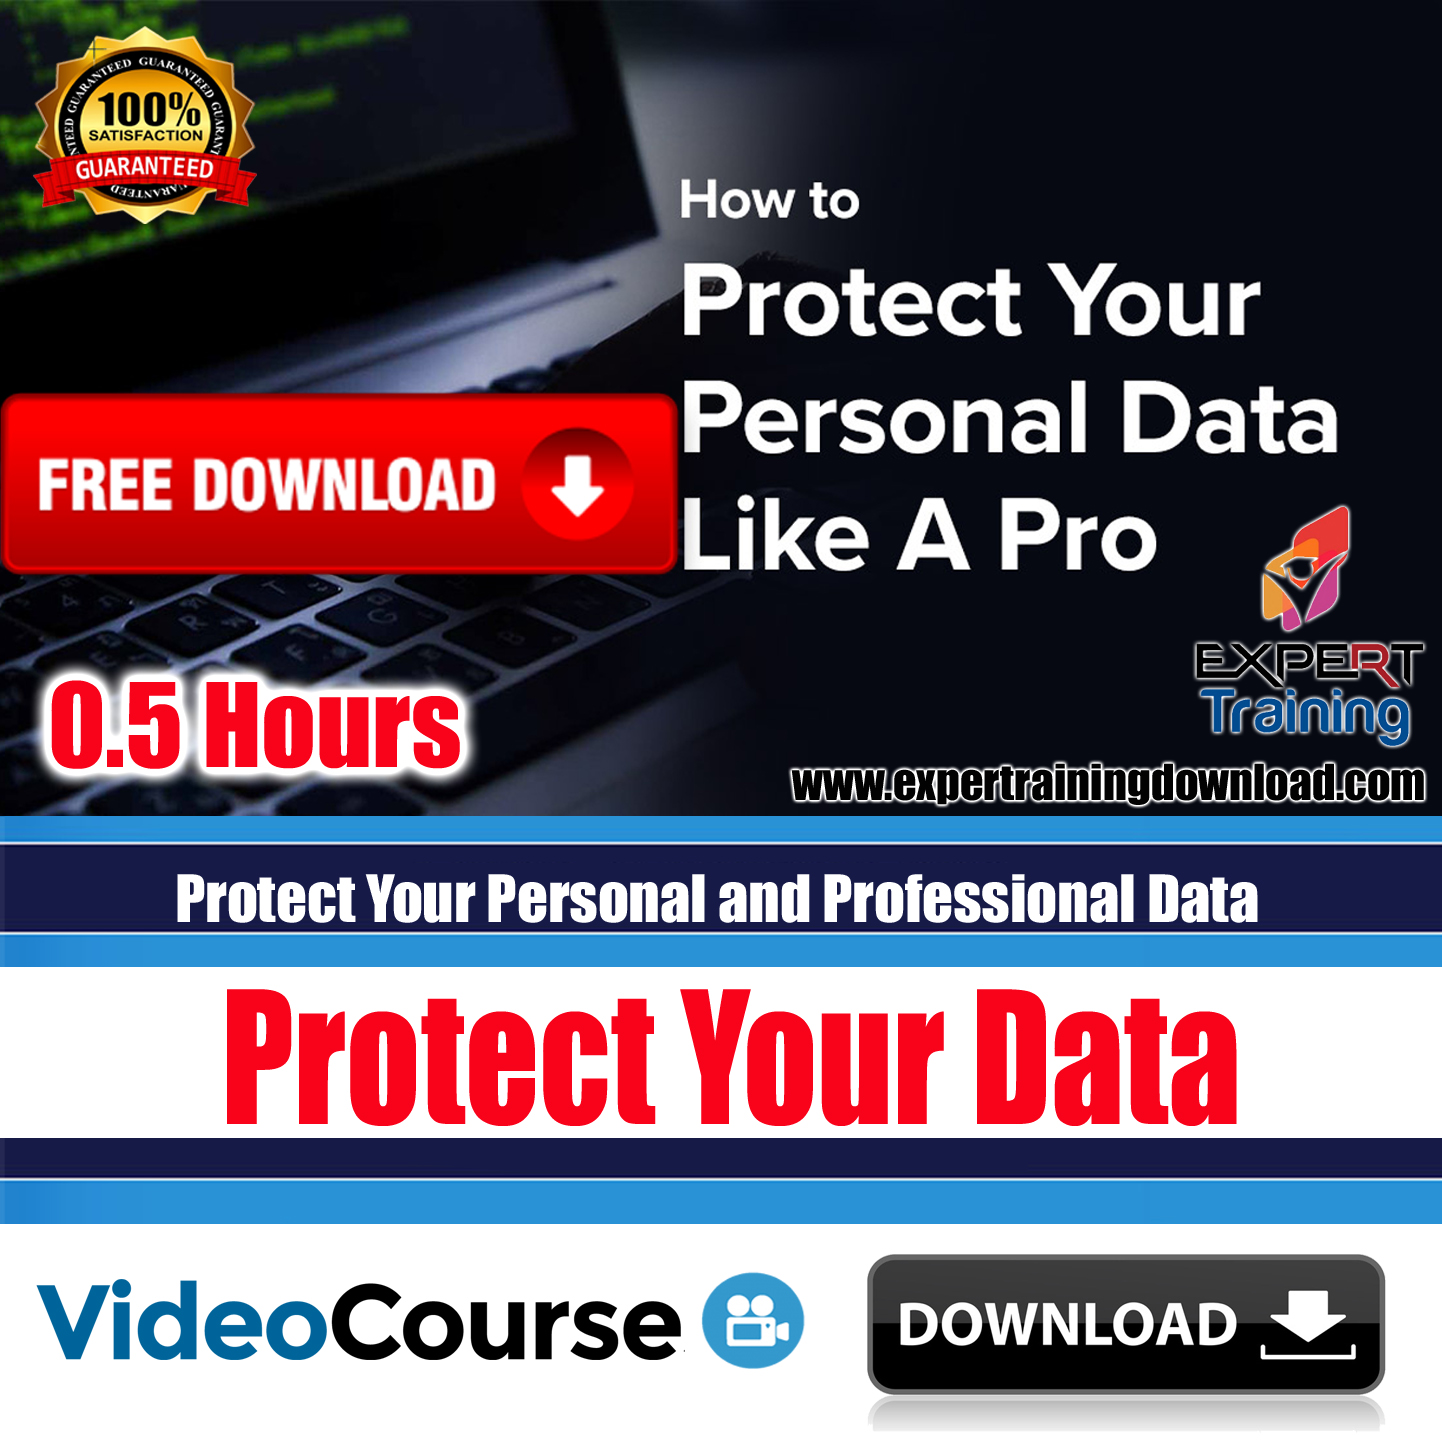 How To Protect Your Personal and Professional Data